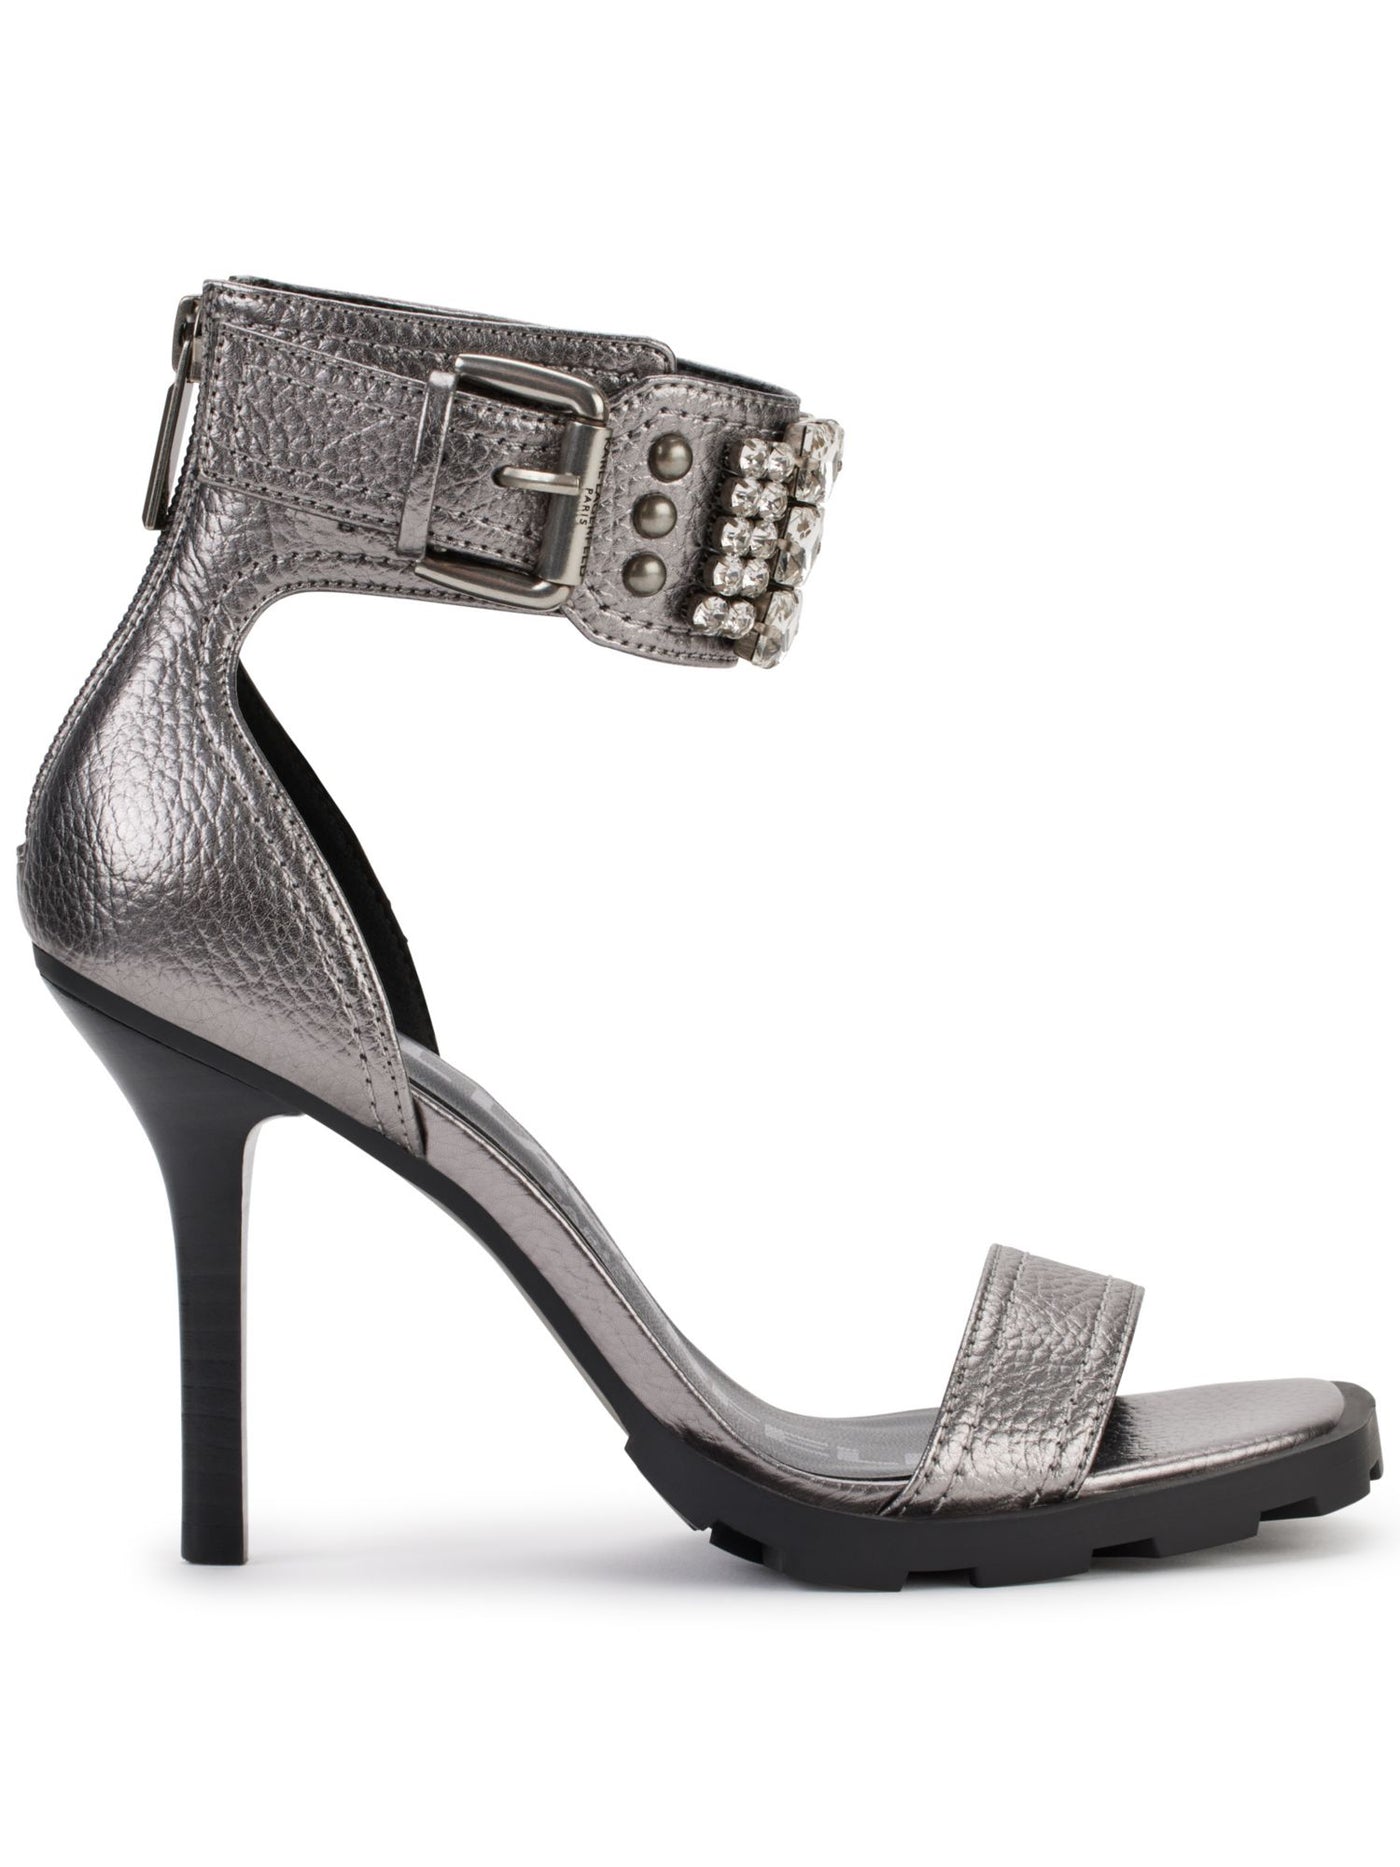 KARL LAGERFELD PARIS Womens Silver Padded Ankle Strap Malinda Square Toe Stiletto Zip-Up Leather Dress Sandals Shoes 5 M